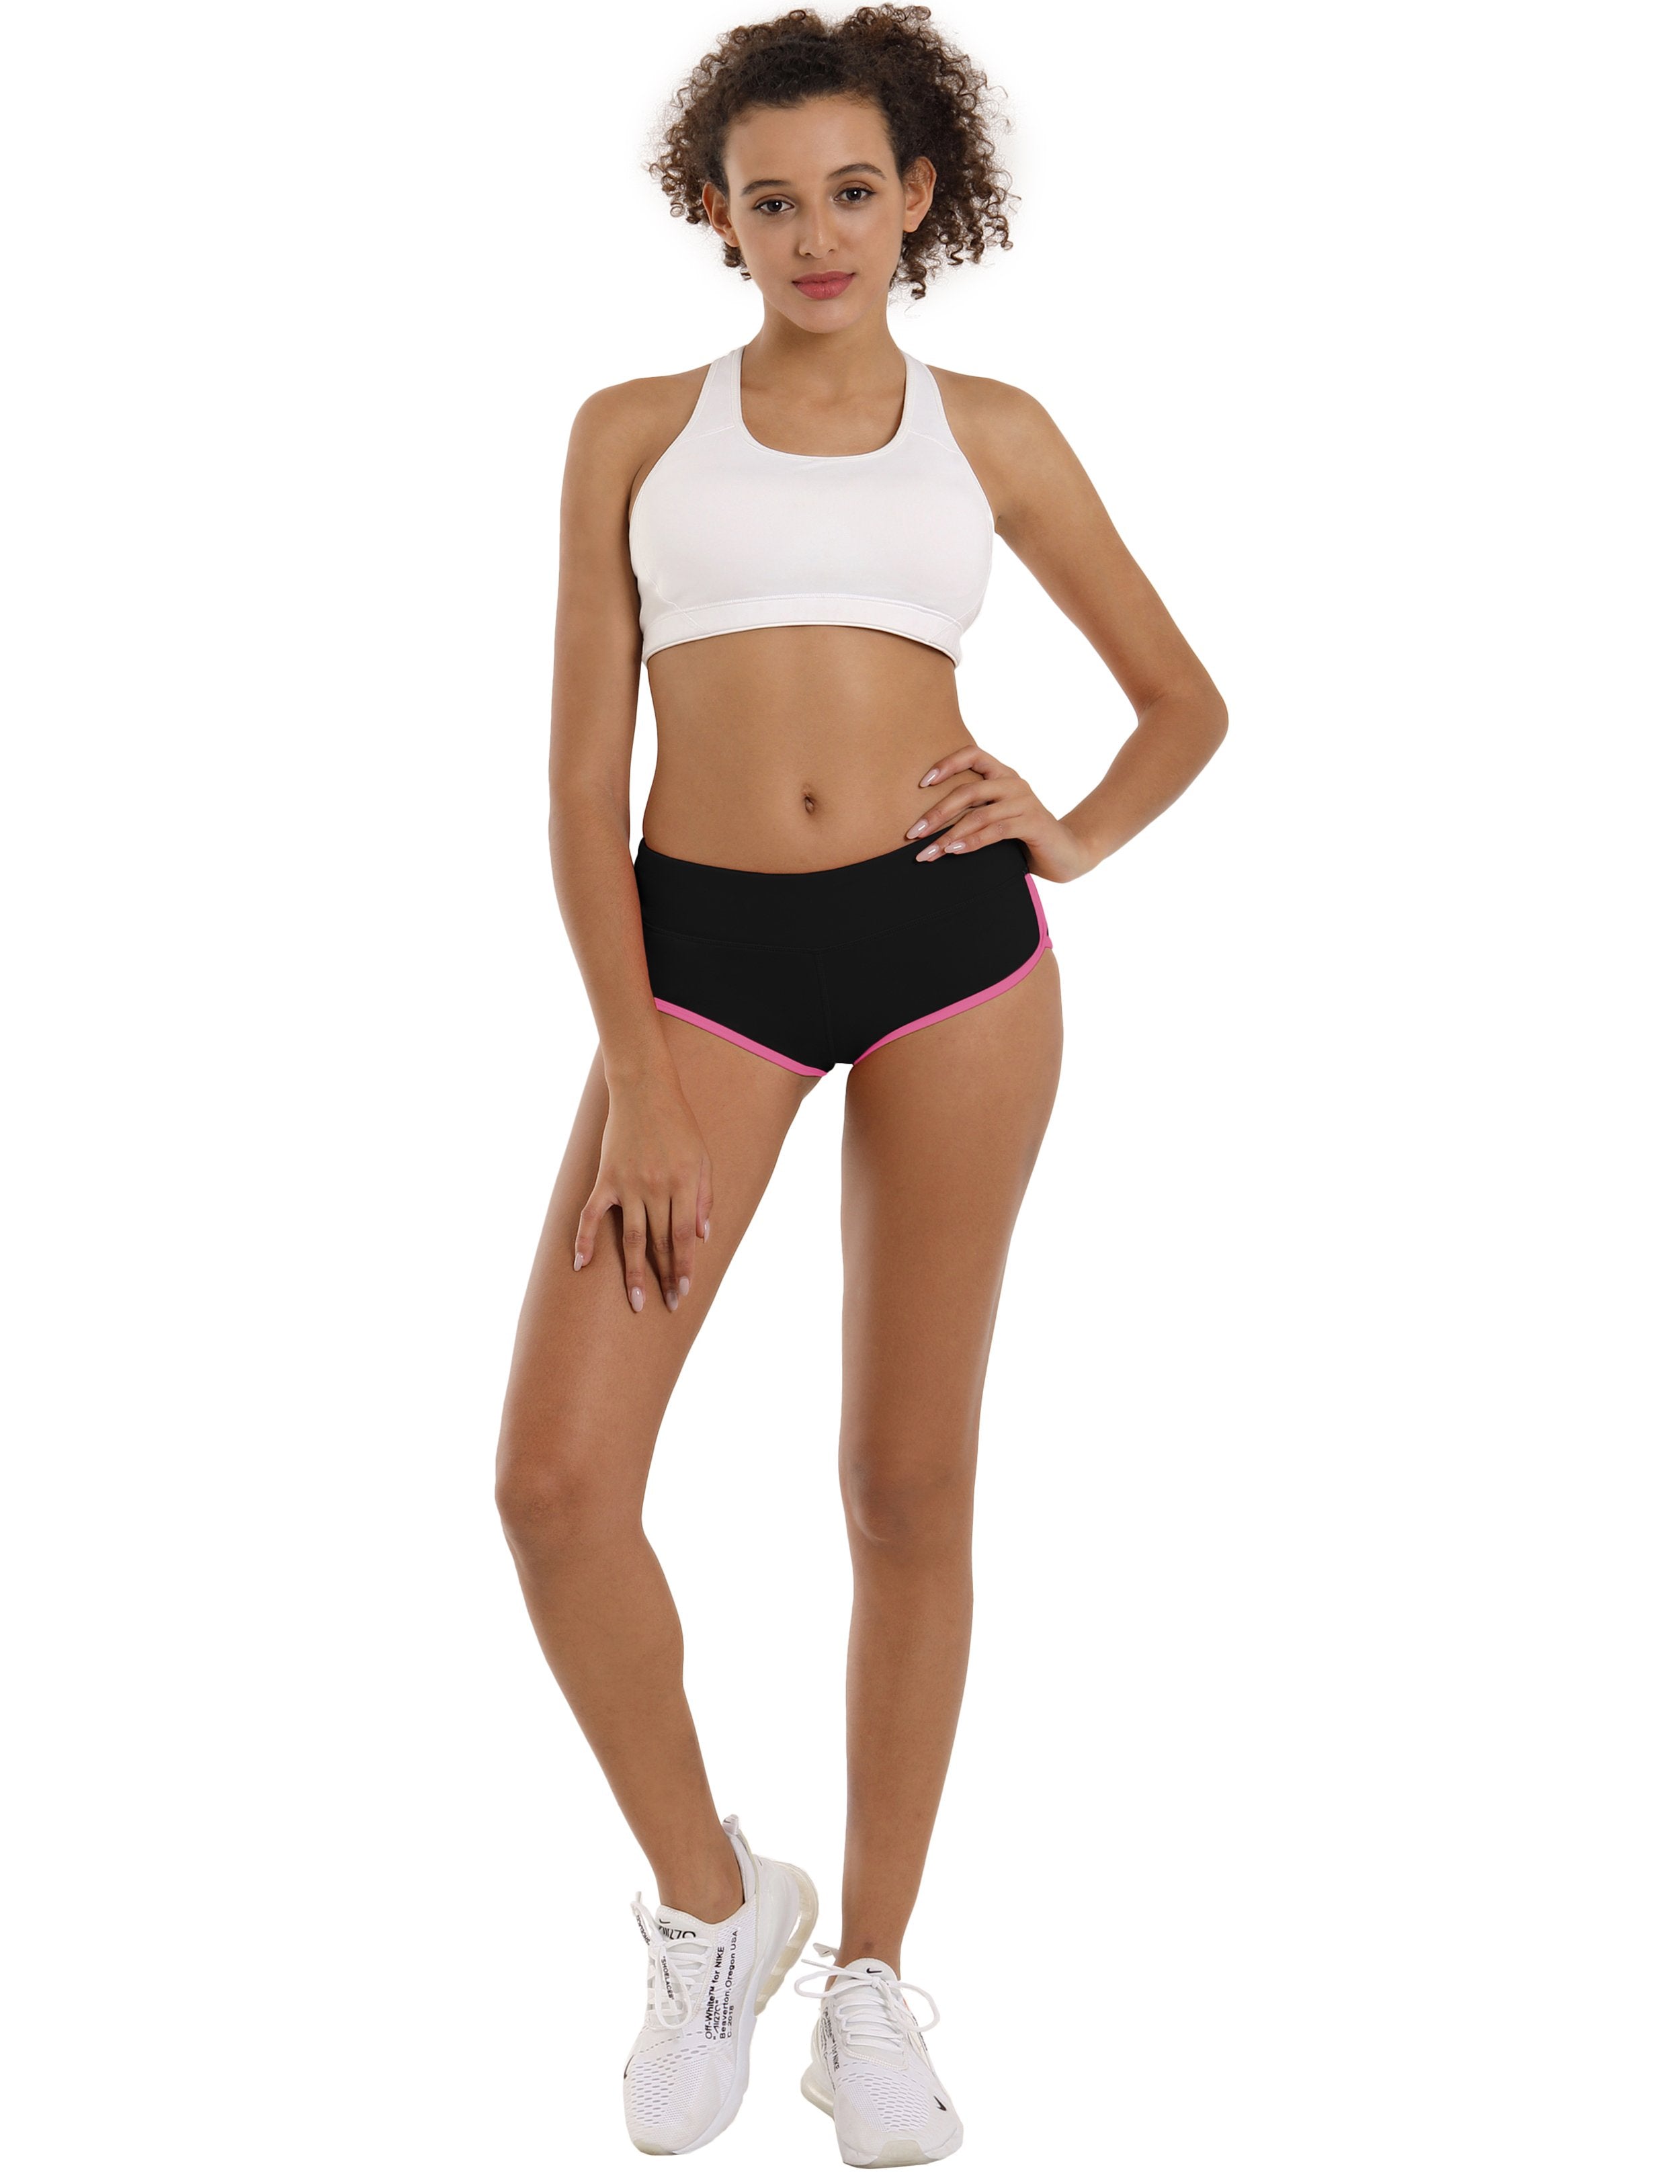 Sexy Booty Golf Shorts black_pink Sleek, soft, smooth and totally comfortable: our newest sexy style is here. Softest-ever fabric High elasticity High density 4-way stretch Fabric doesn't attract lint easily No see-through Moisture-wicking Machine wash 75%Nylon/25%Spandex